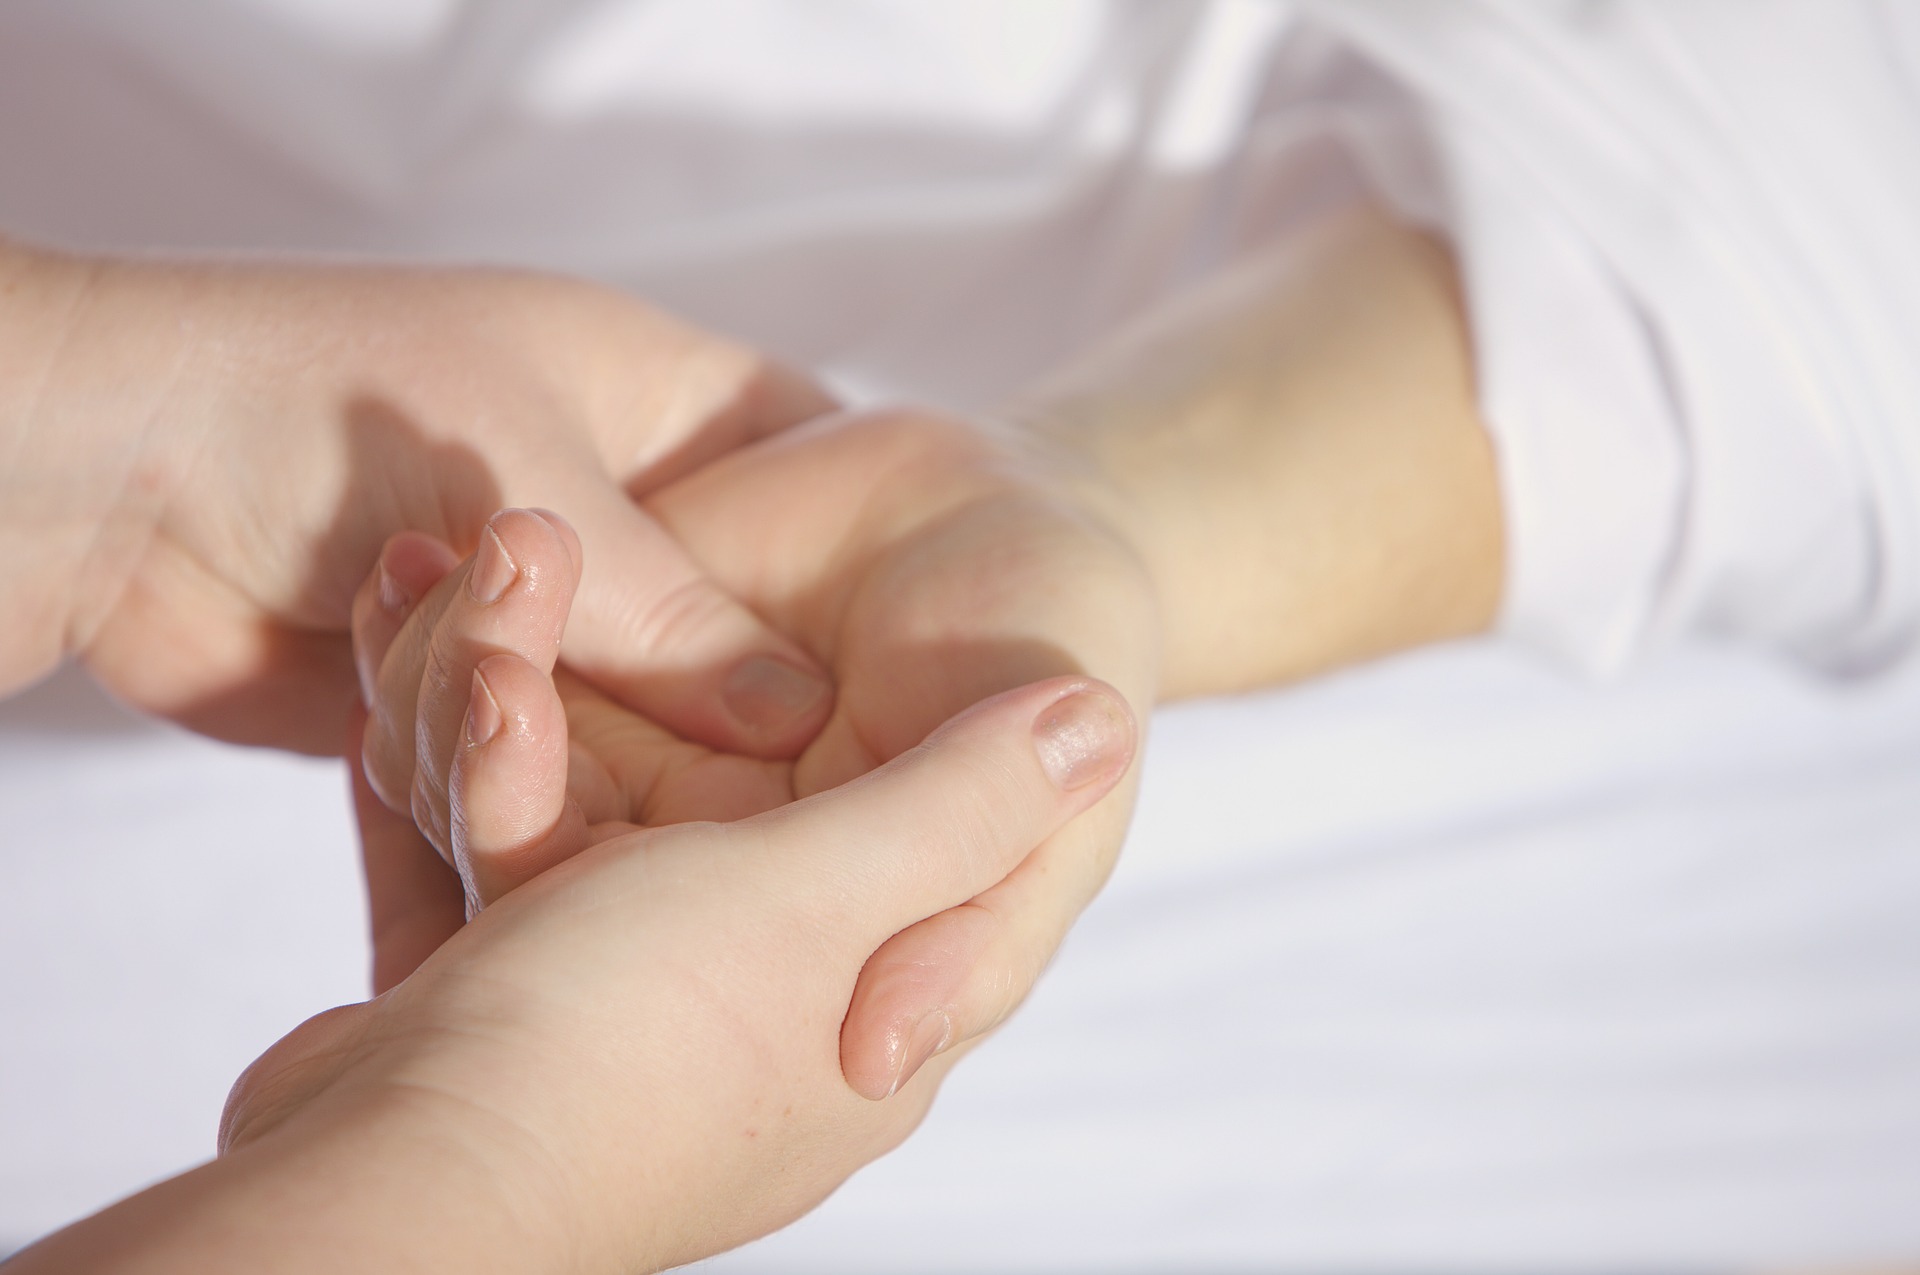 Left Hand Itching Meaning, Health Conditions and Prevention